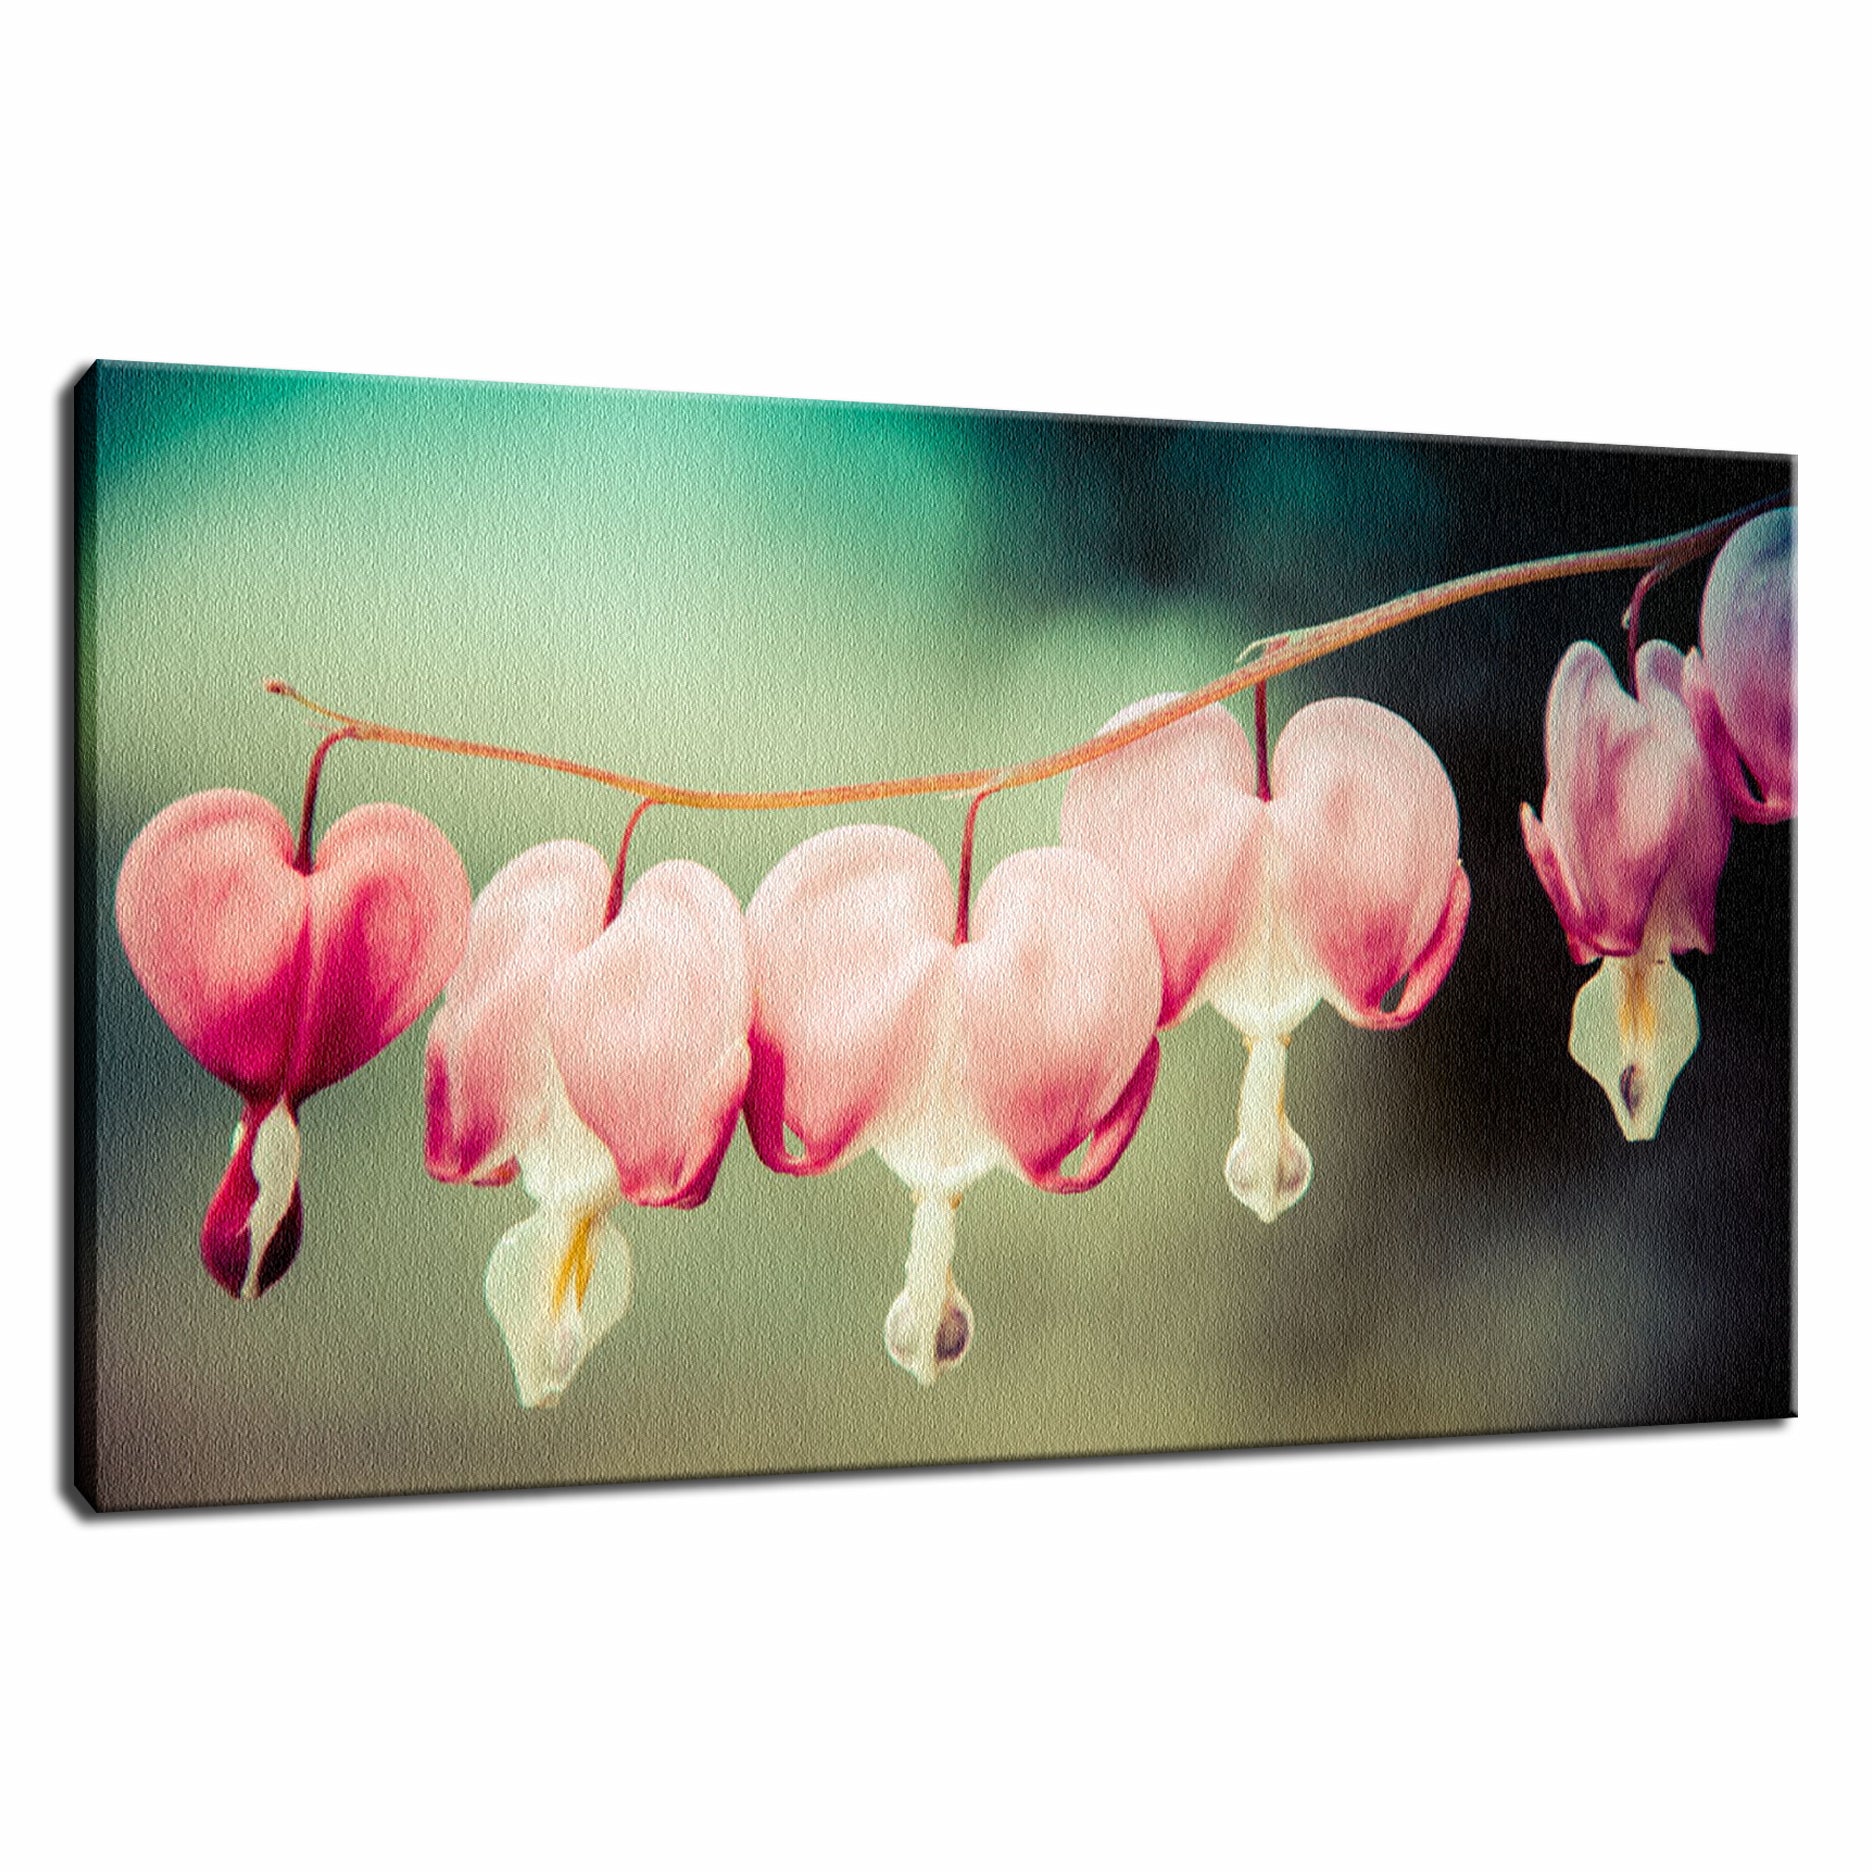 Abstract Wall Decor: Be Still My Bleeding Heart Colorized Nature / Floral Photo Fine Art Canvas Wall Art Prints  - PIPAFINEART